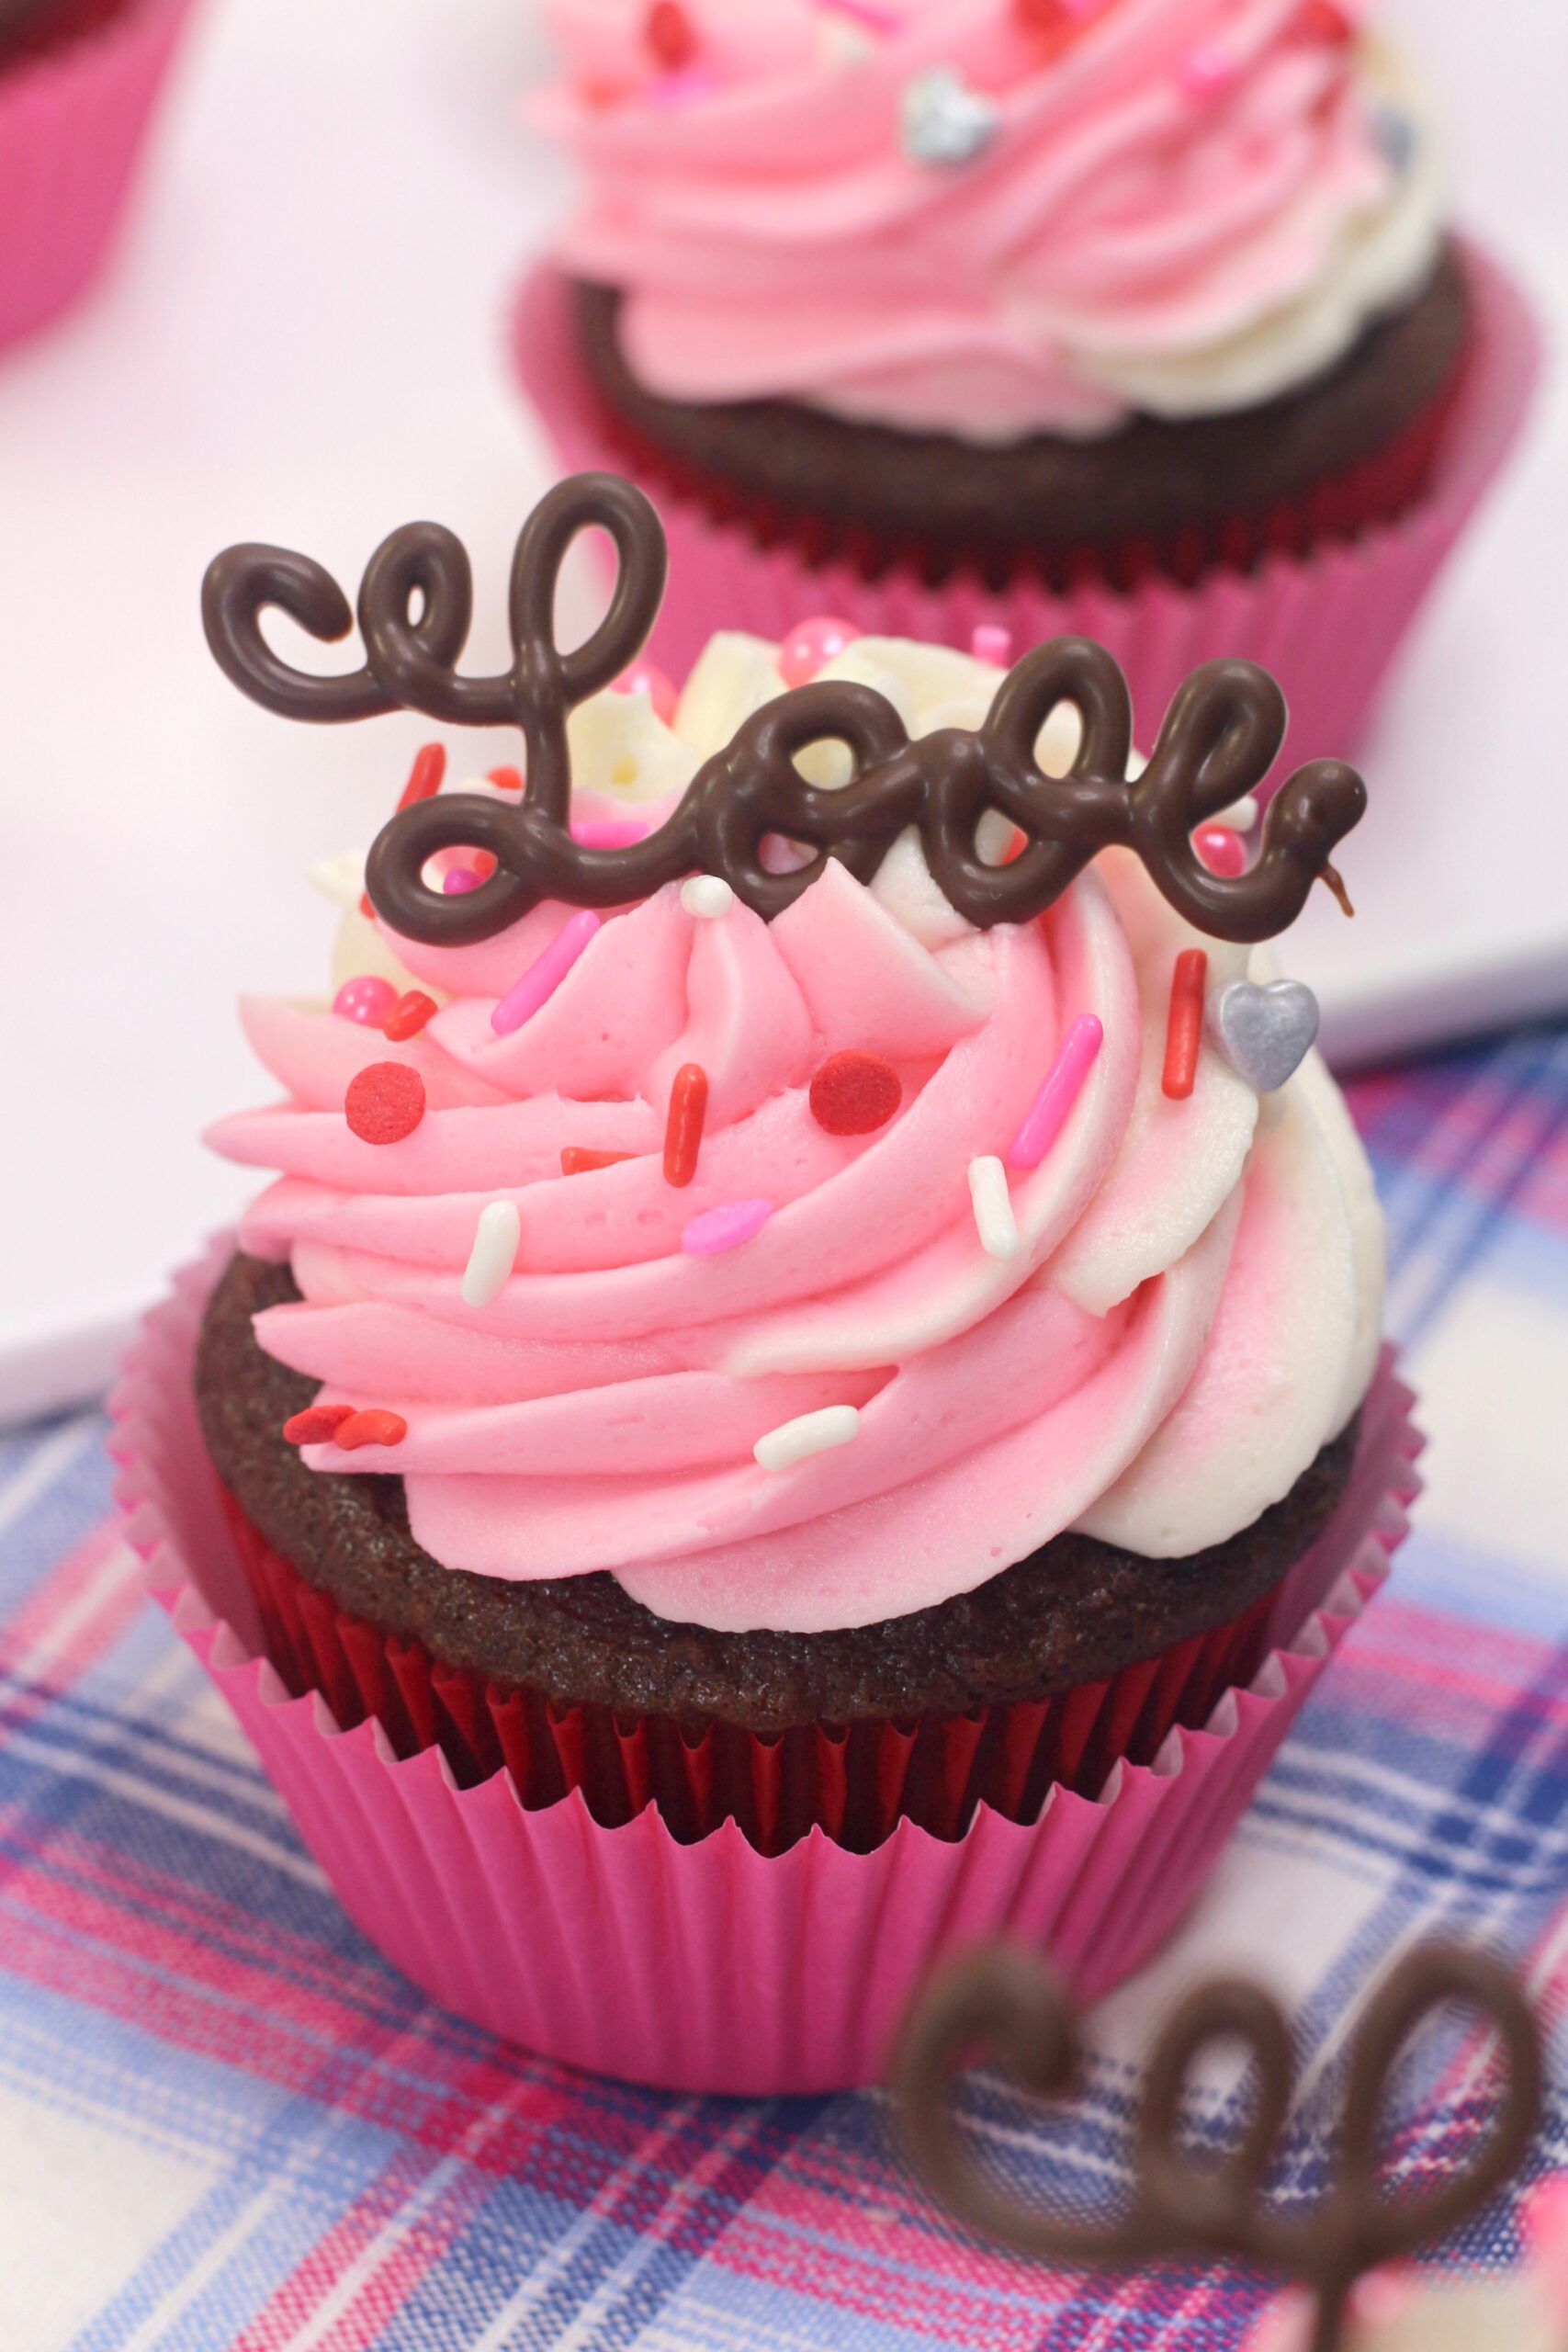 Chocolate Valentines Day Love Cupcake with White and Pink Frosting